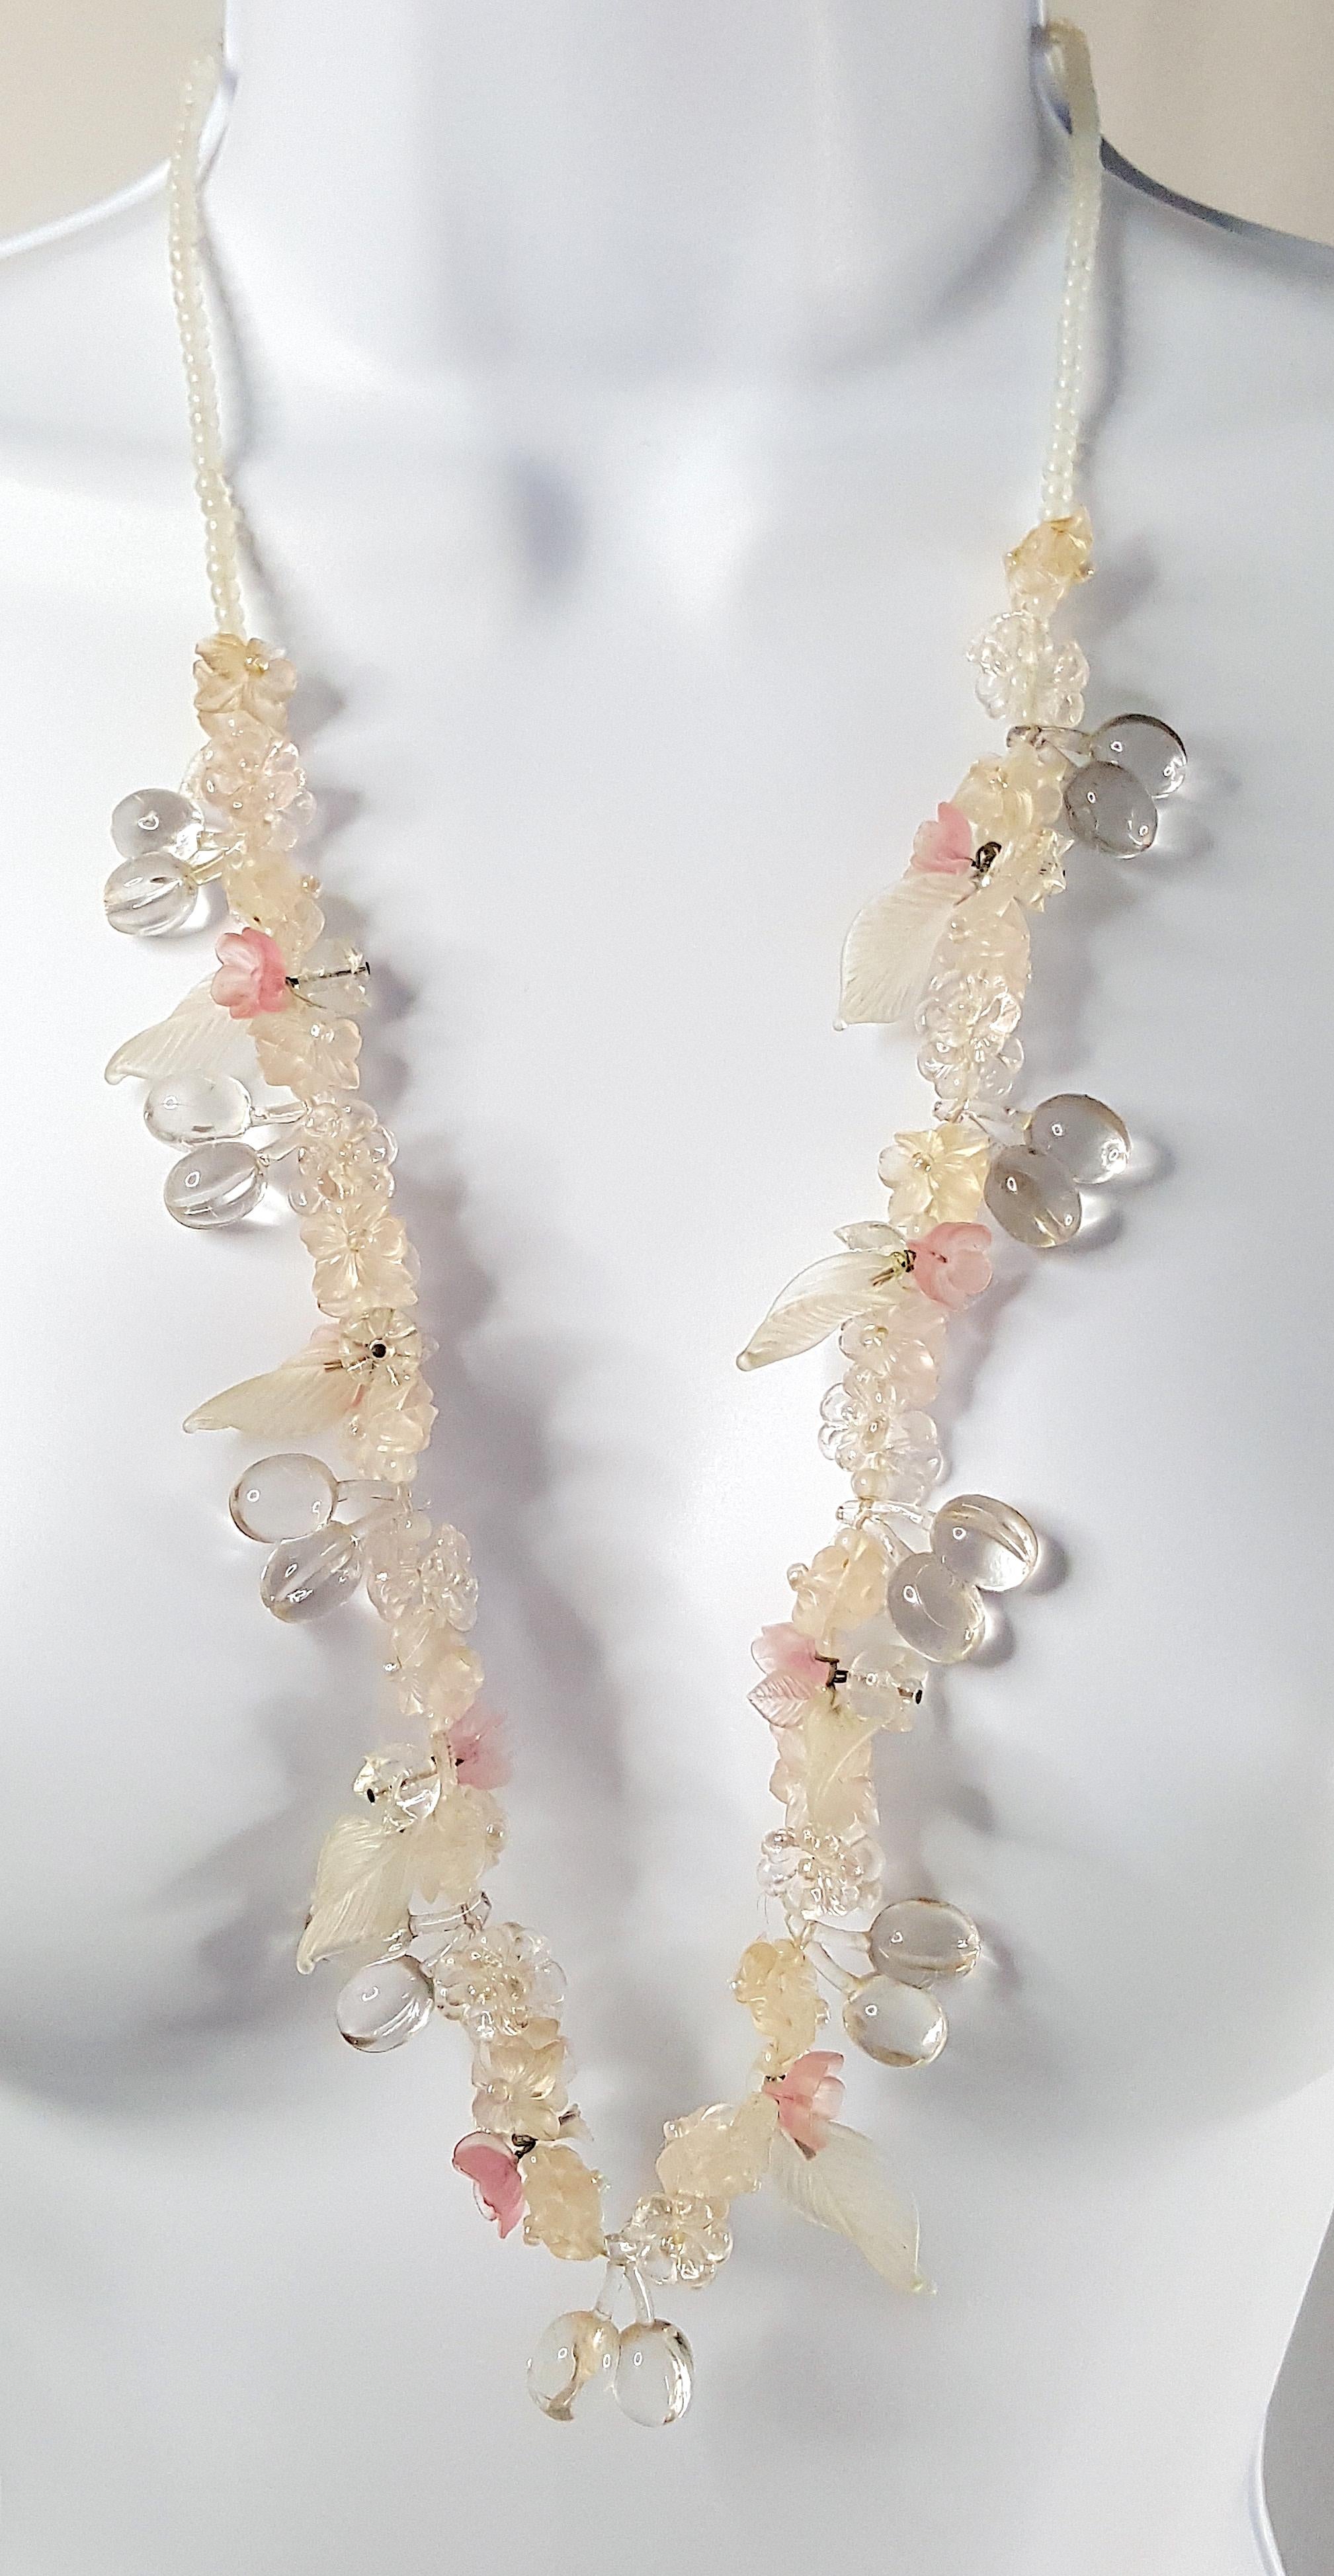 With a silver clasp that could be as old as the Victorian period and in an Art-Nouveau style with pale intricate flora motifs, this antique long glass necklace features lampwork-like hand-pressed glass that realizes pink, frosted and clear flowers,